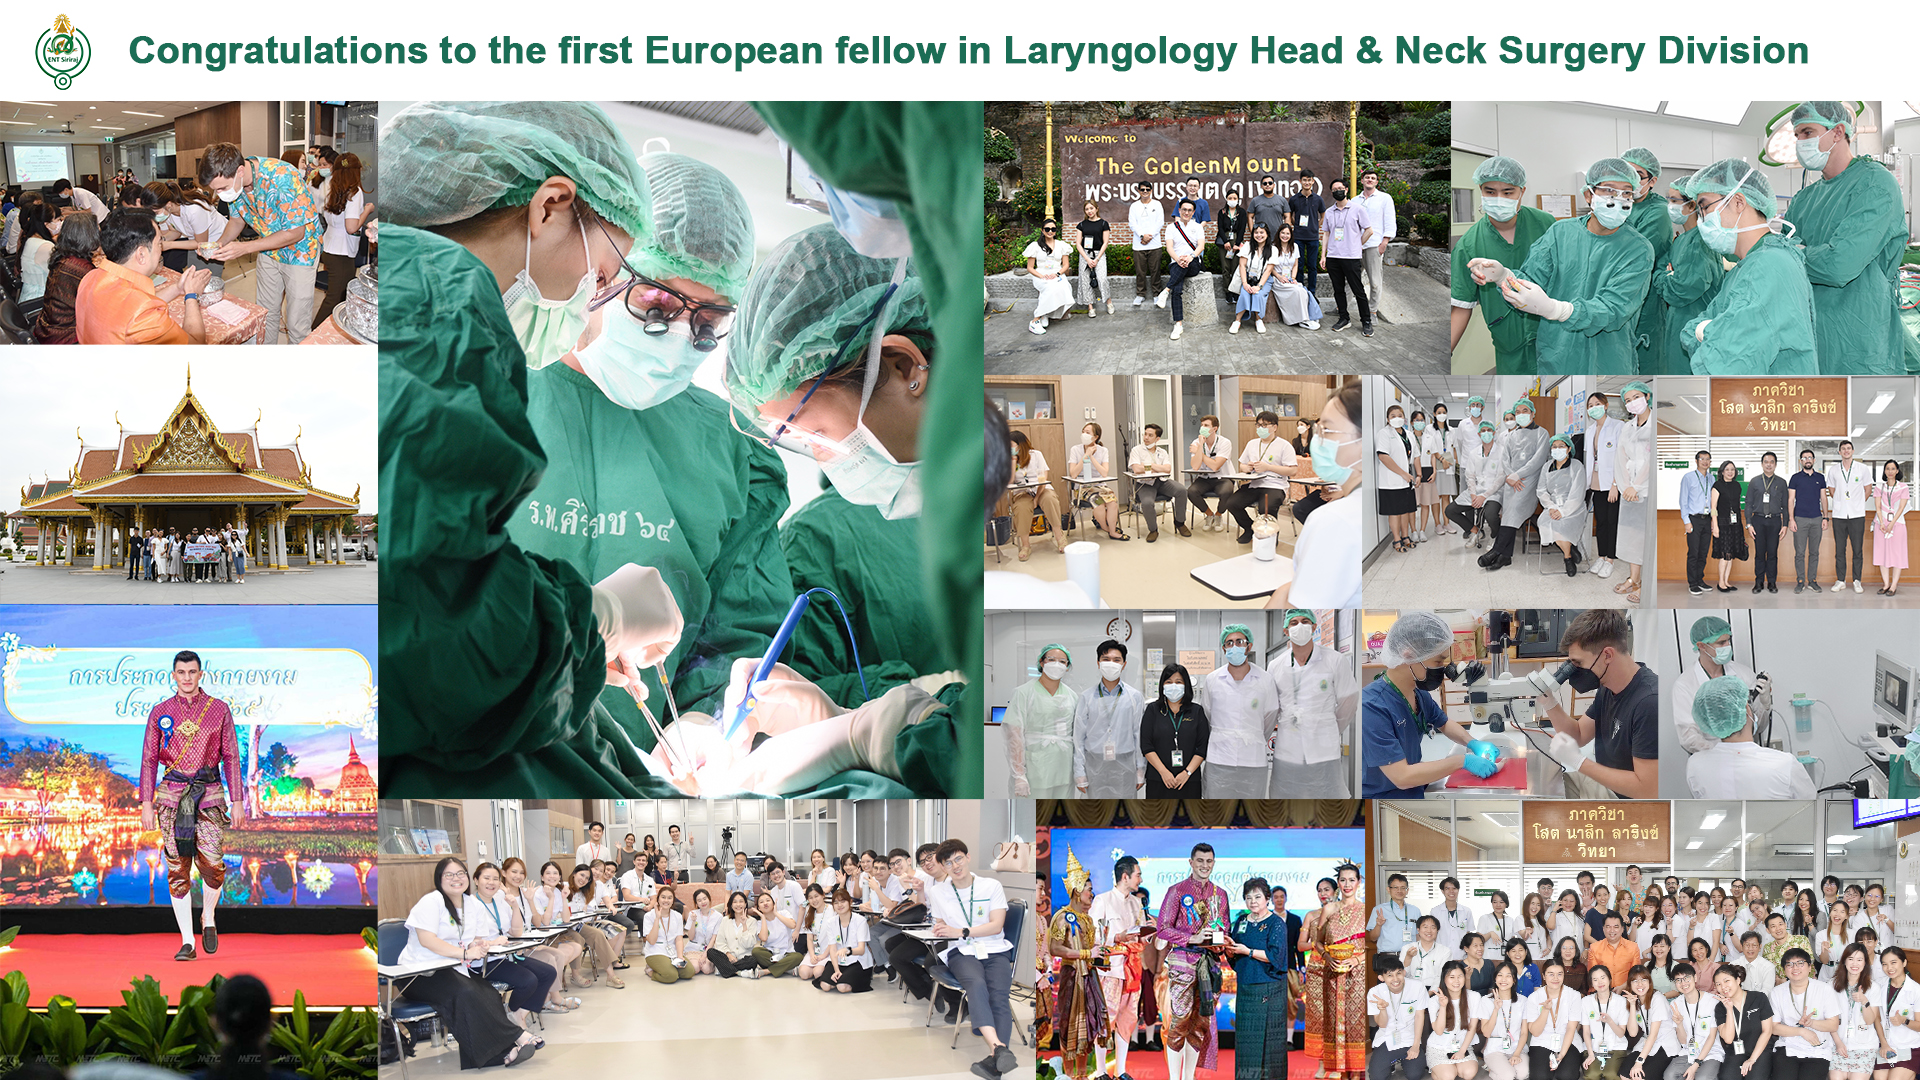 Congratulations to the first European fellow in Laryngology Head & Neck Surgery Division!